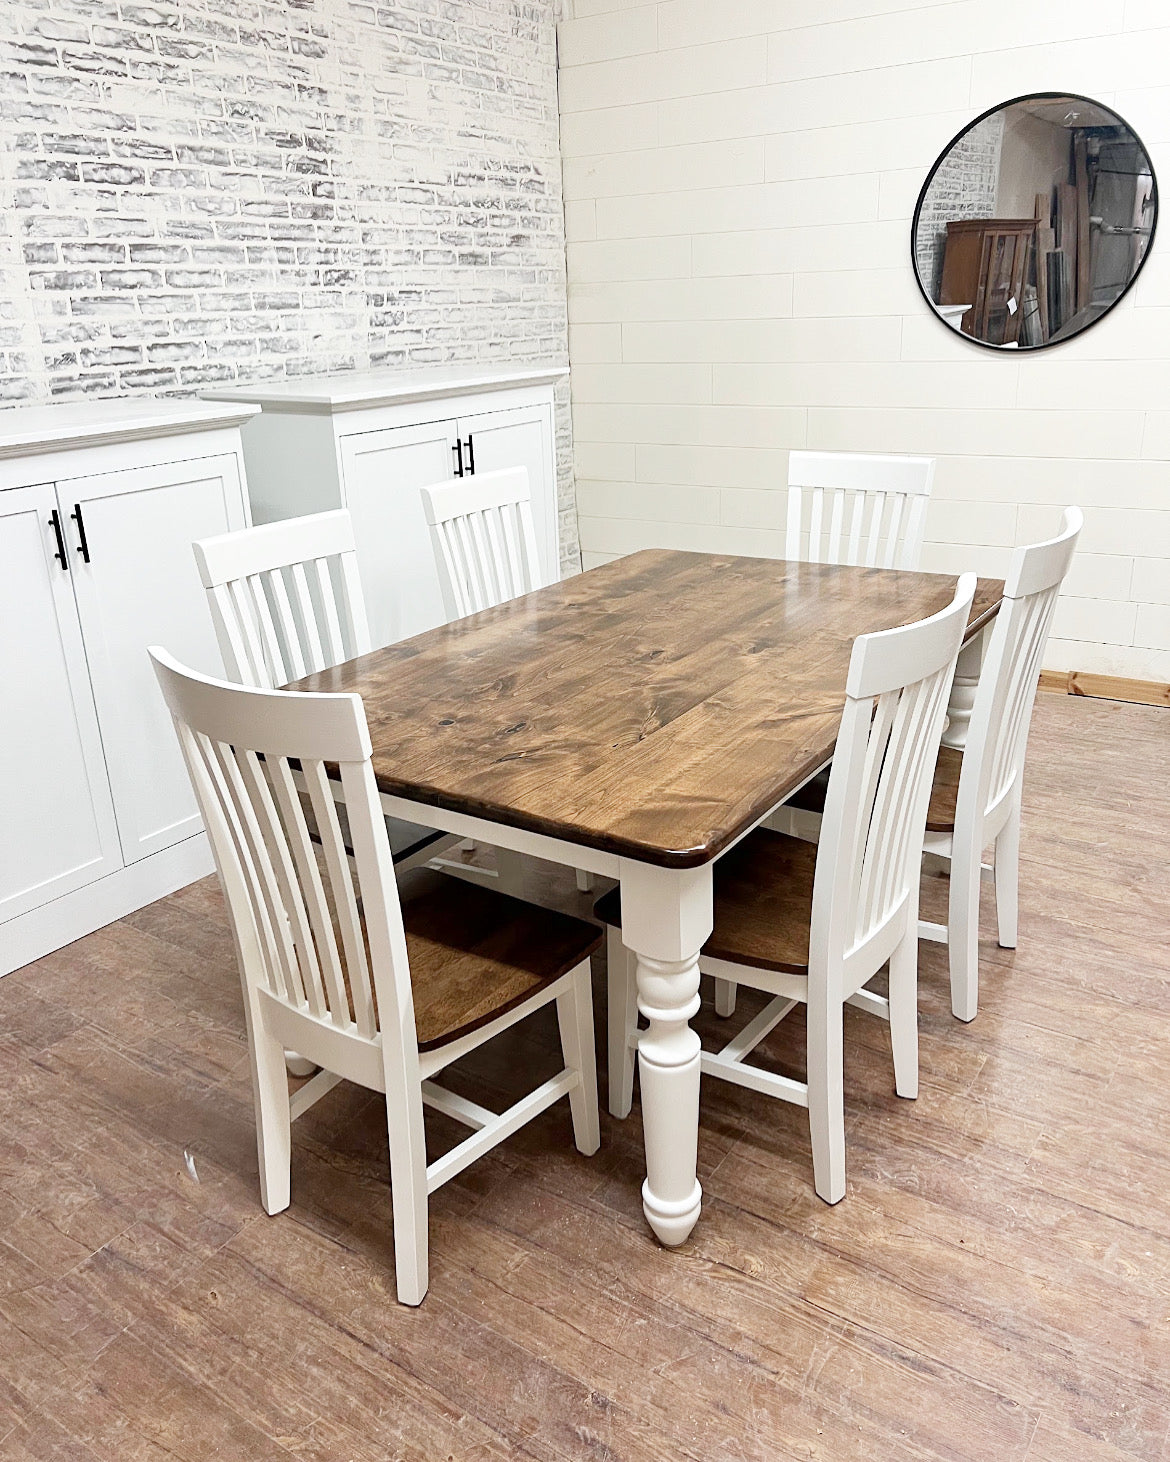 Pictured with a 5' L x 42" W Rustic Alder Table stained Espresso and a White painted base. Pictured with 6 Mission Dining Chairs.